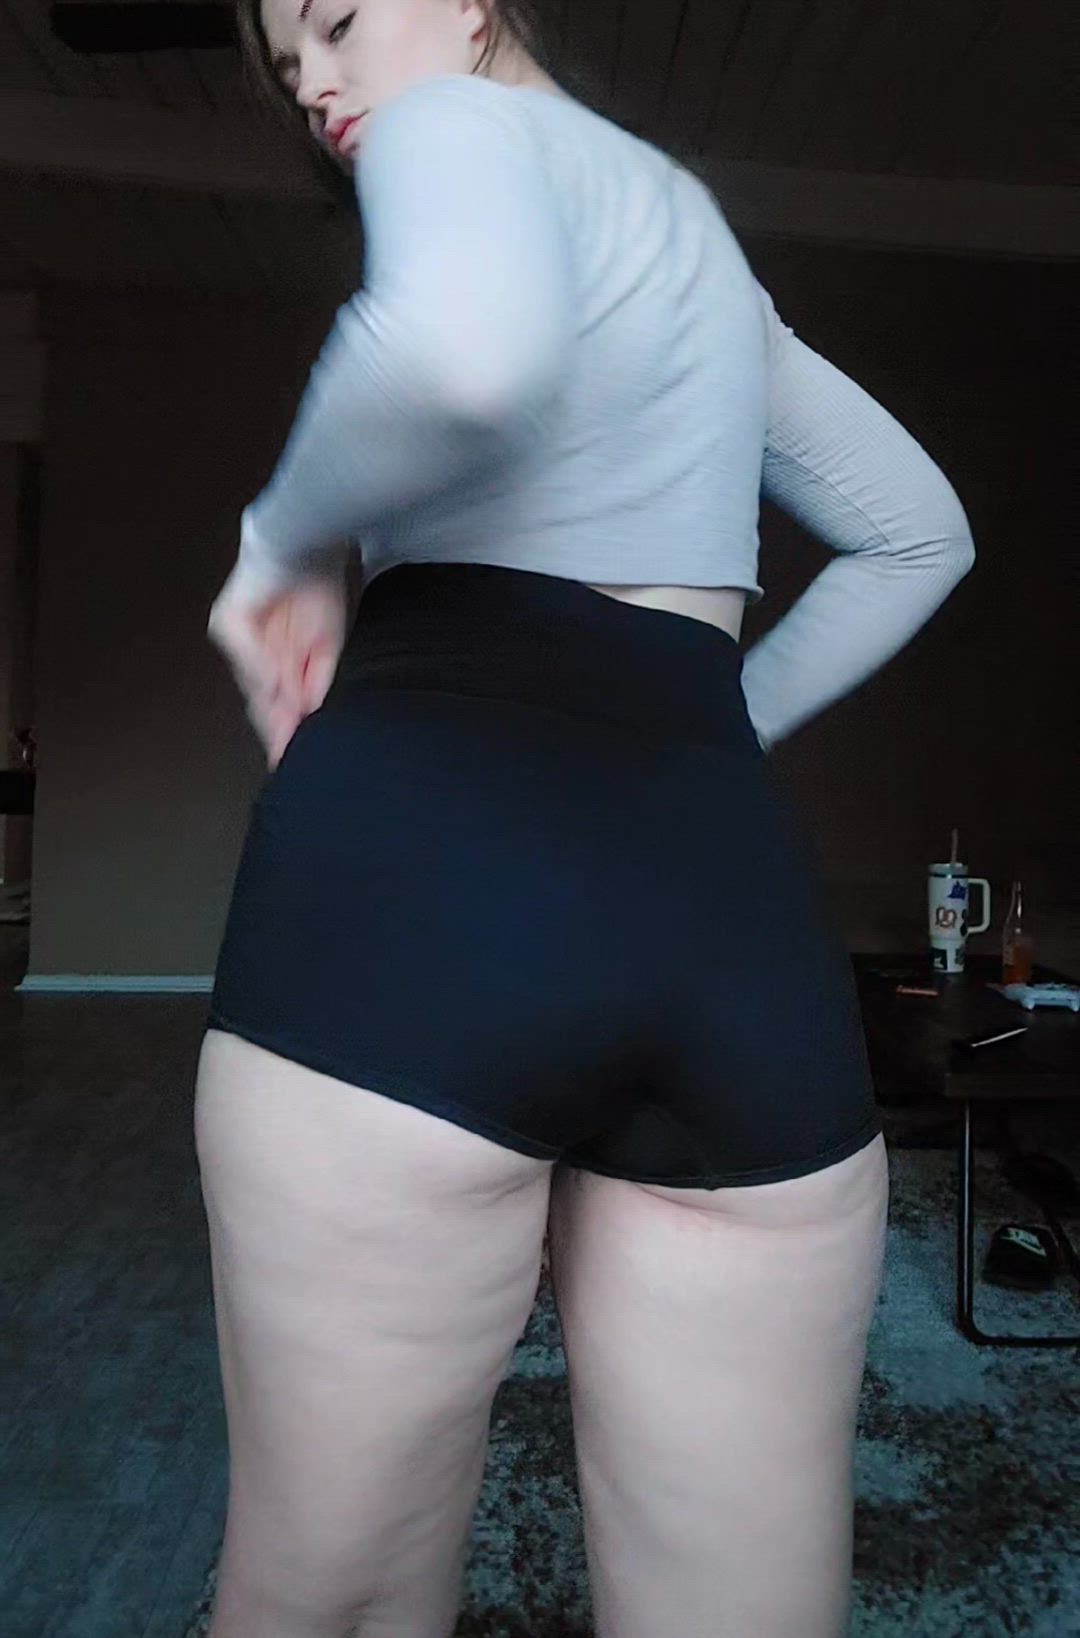 Ass porn video with onlyfans model thepinkrelief <strong>@thepinkrelief</strong>